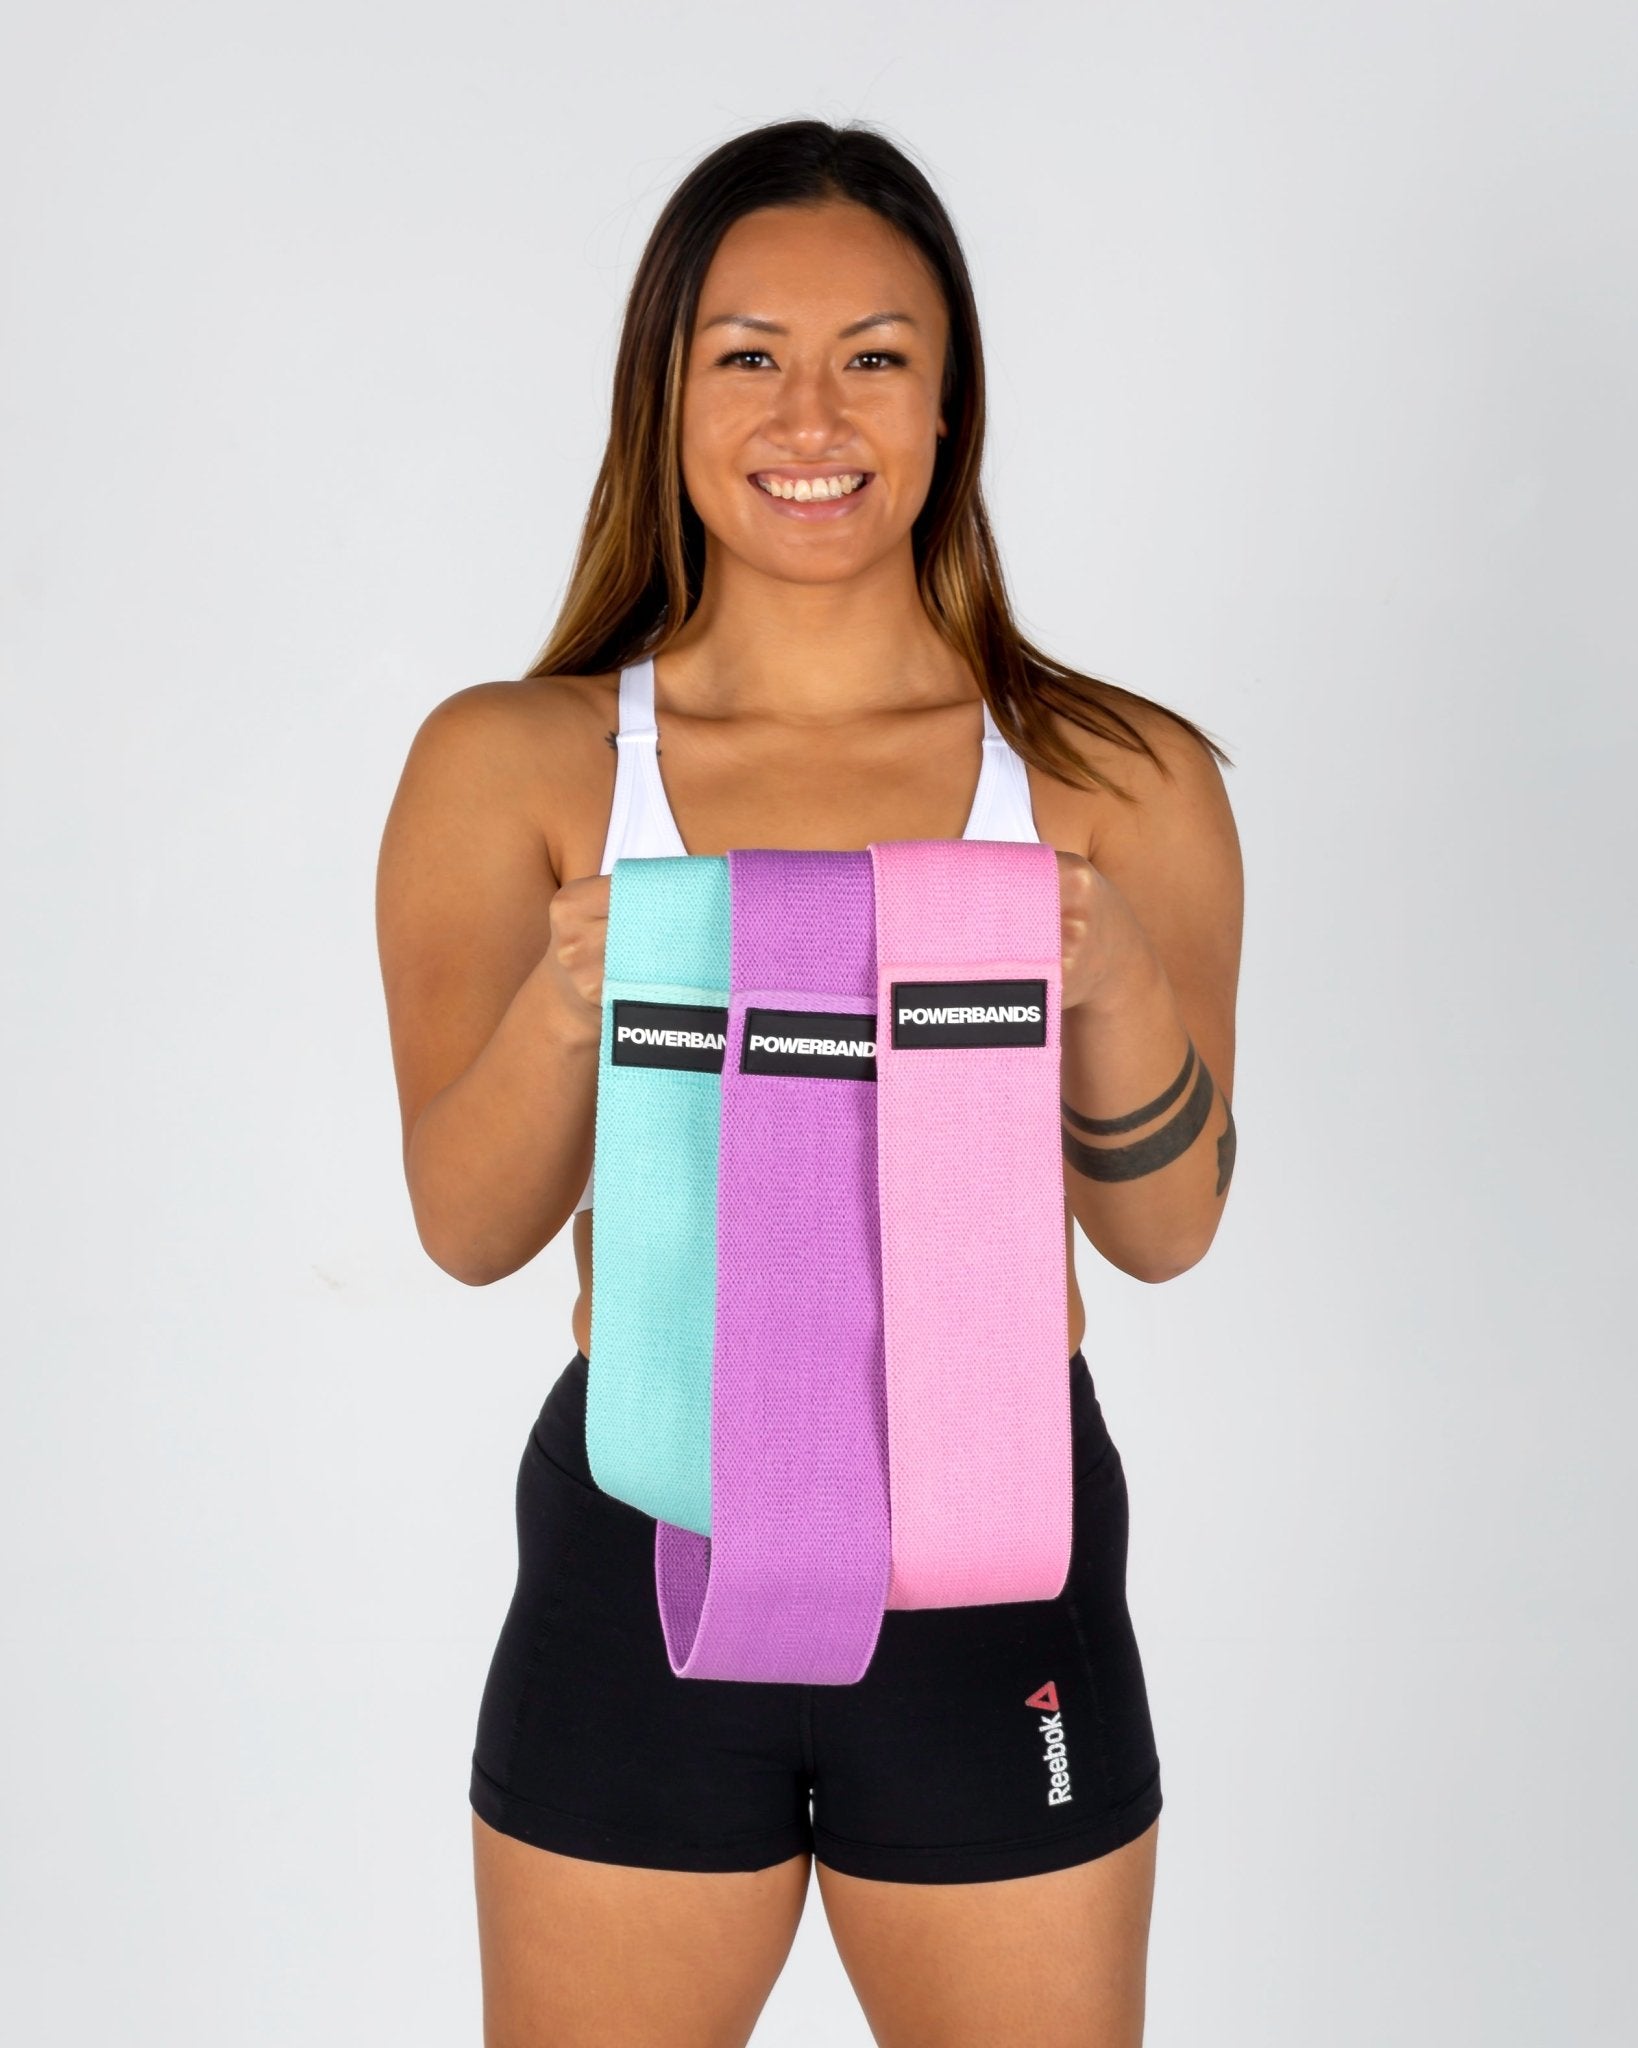 Resistance Band Stretches to Loosen Stiff Muscles - POWERBANDS®